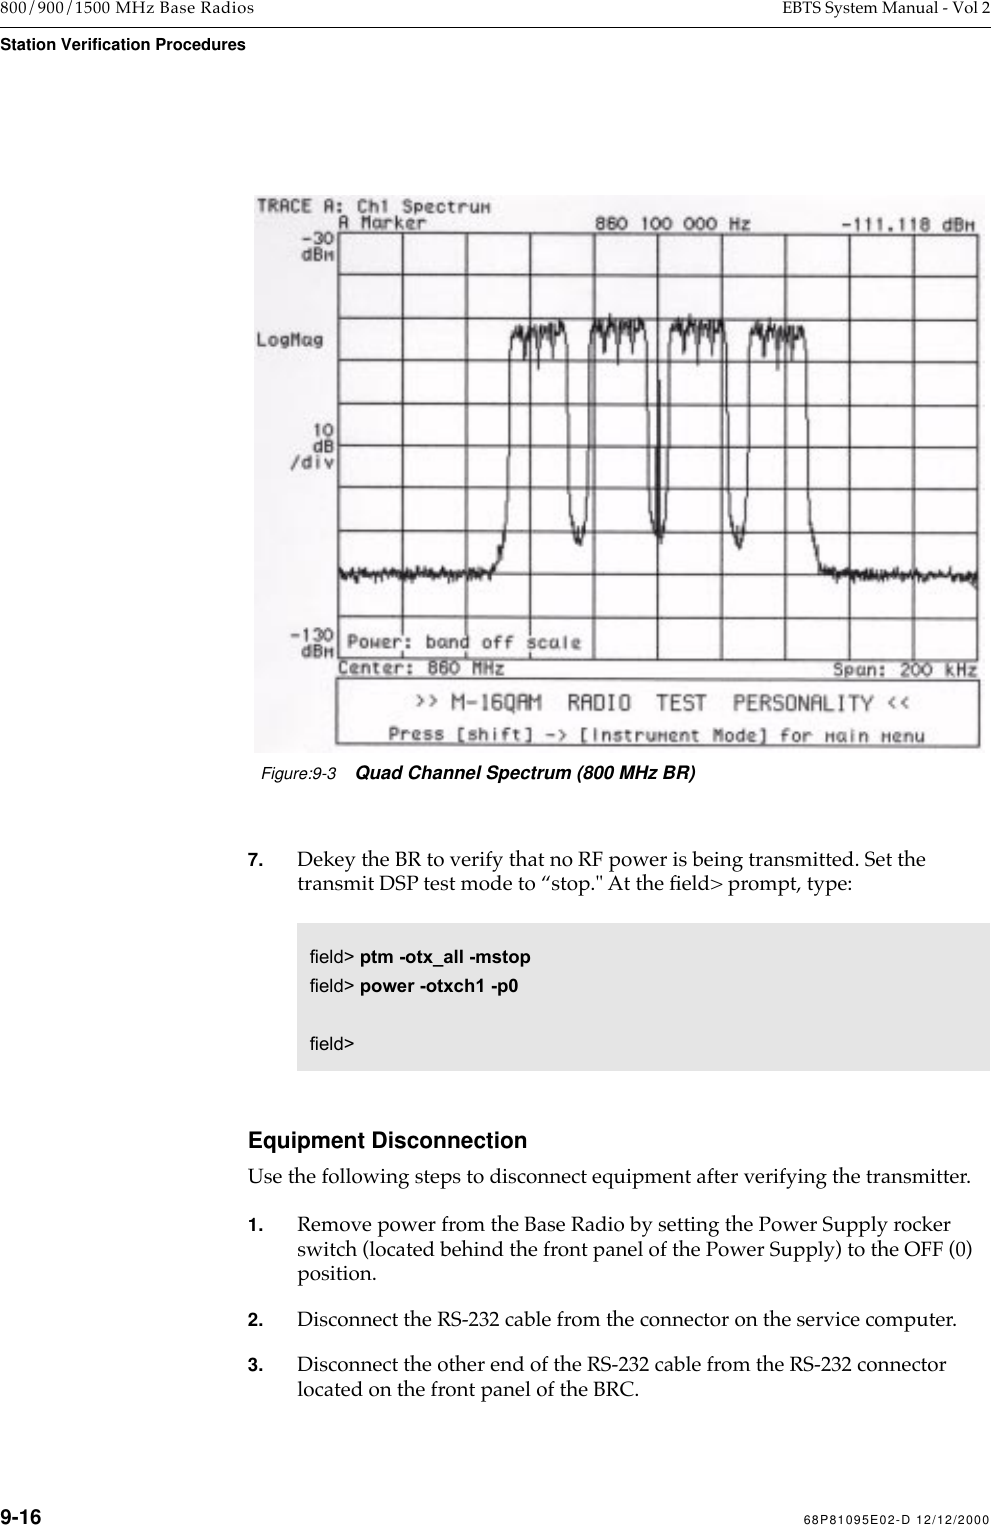 9-16 68P81095E02-D 12/12/2000800/900/1500 MHz Base Radios EBTS System Manual - Vol 2Station Verification Procedures7. Dekey the BR to verify that no RF power is being transmitted. Set the transmit DSP test mode to Òstop.&quot; At the Þeld&gt; prompt, type: Equipment DisconnectionUse the following steps to disconnect equipment after verifying the transmitter. 1. Remove power from the Base Radio by setting the Power Supply rocker switch (located behind the front panel of the Power Supply) to the OFF (0) position.2. Disconnect the RS-232 cable from the connector on the service computer.3. Disconnect the other end of the RS-232 cable from the RS-232 connector located on the front panel of the BRC.Figure:9-3Quad Channel Spectrum (800 MHz BR)field&gt; ptm -otx_all -mstopfield&gt; power -otxch1 -p0field&gt; 